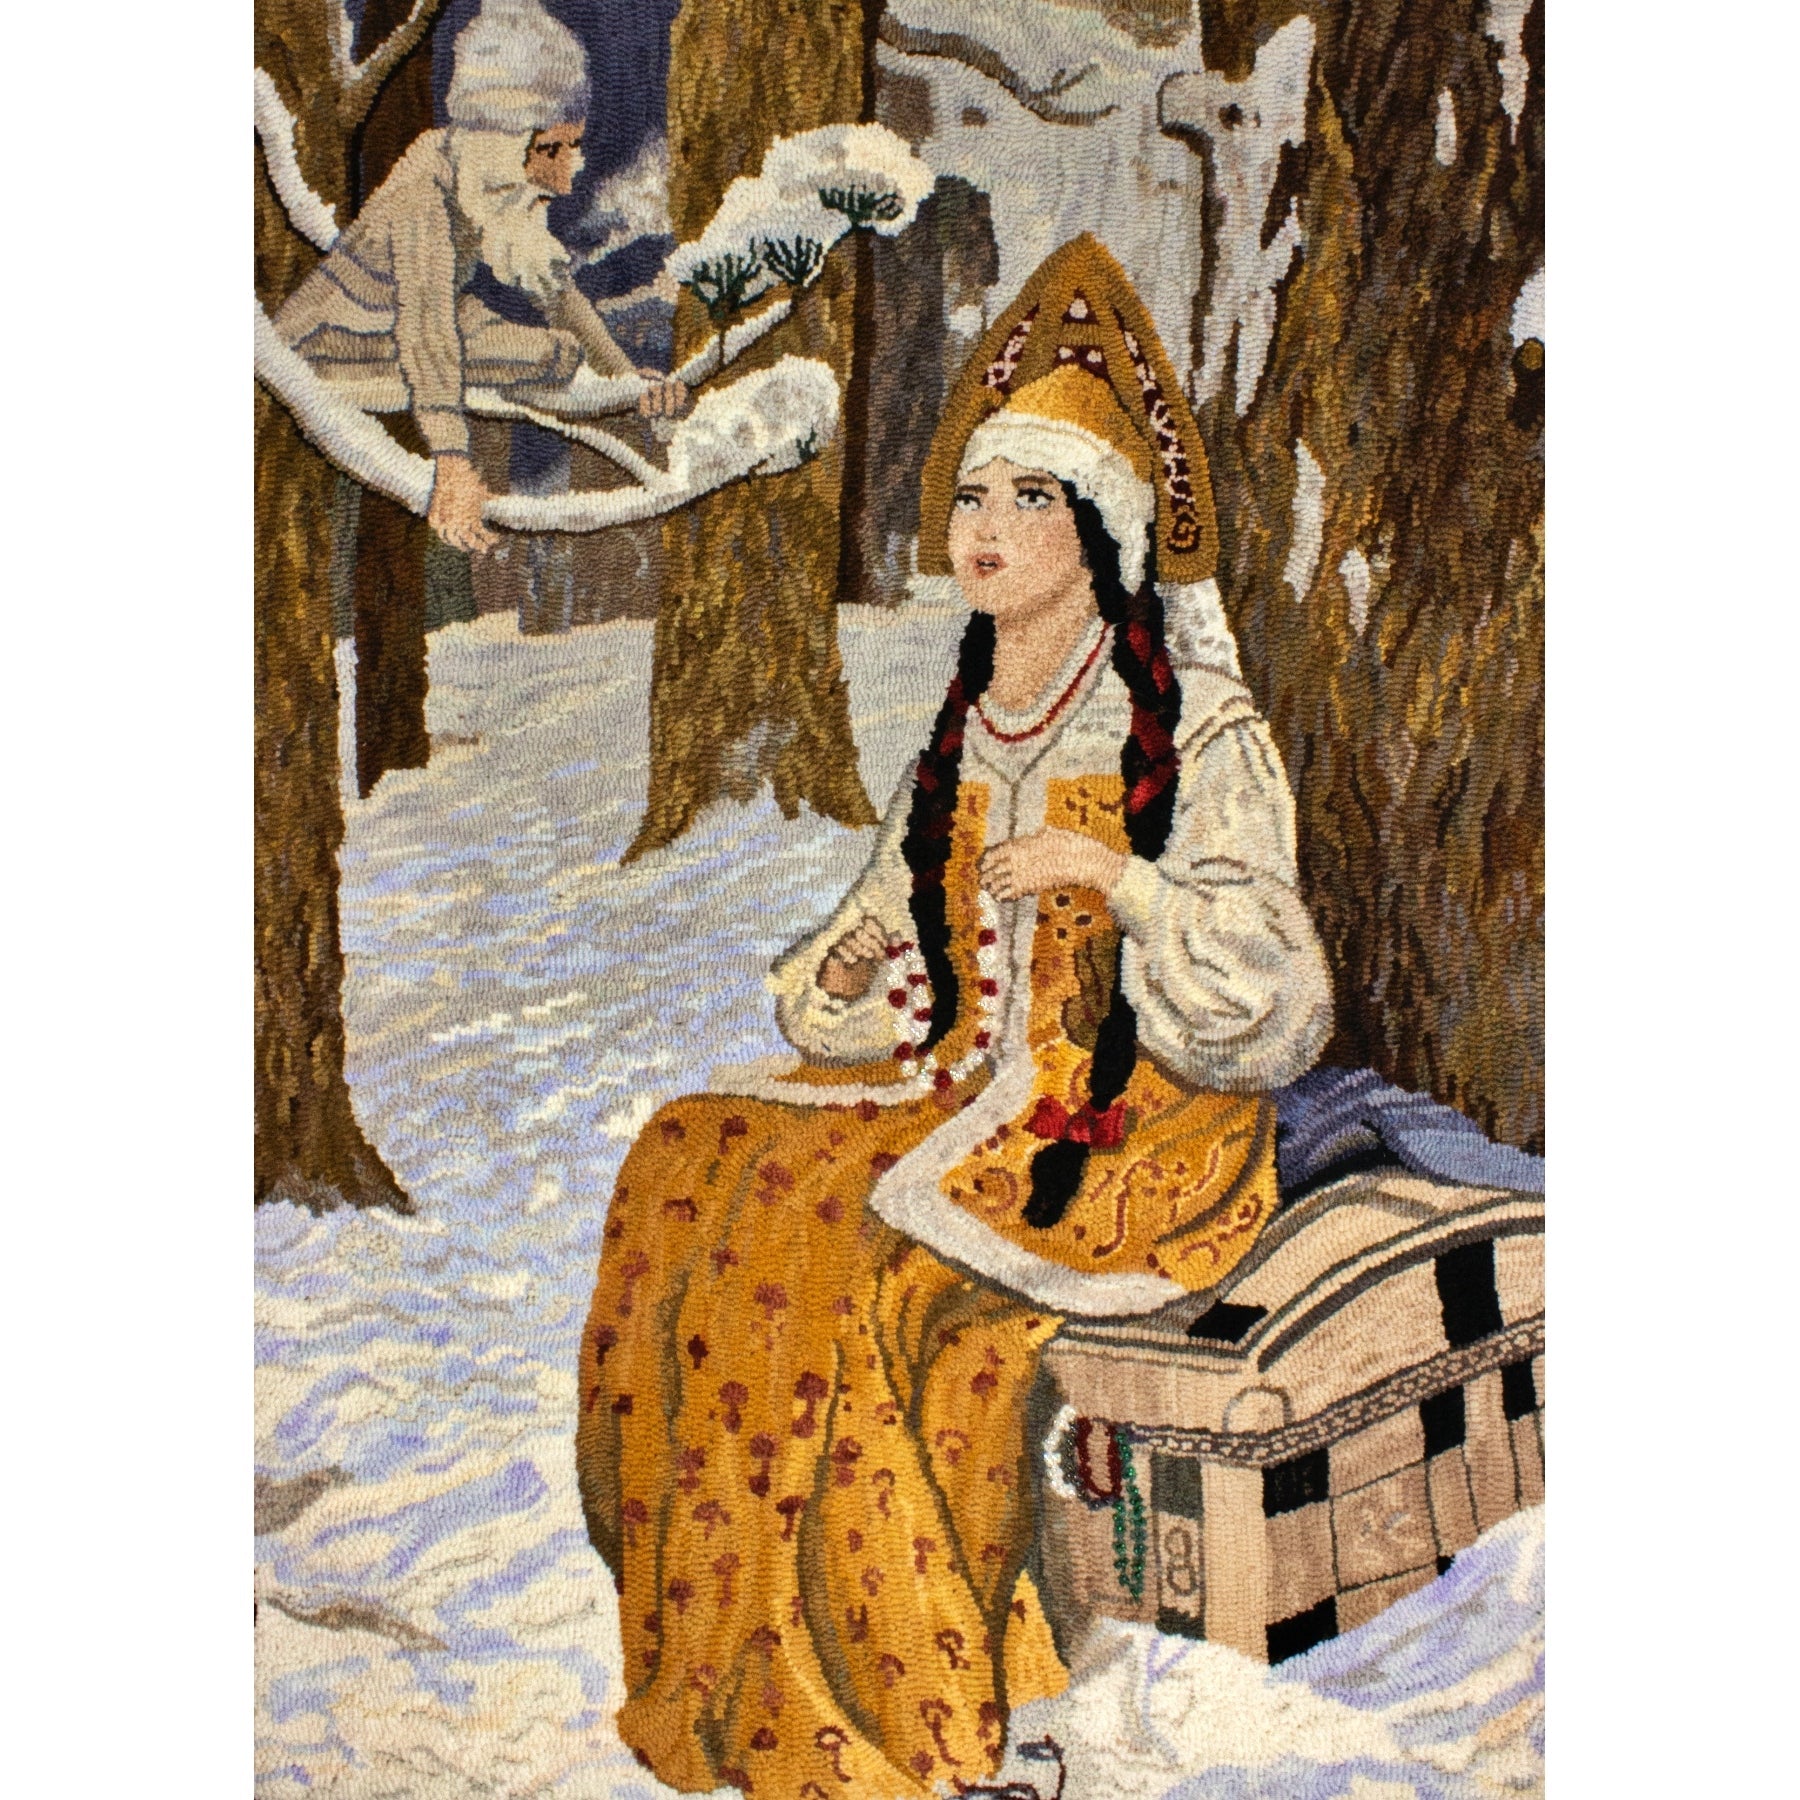 The Frost, ill. Arthur A Dixon, 1917, rug hooked by Connie Bradley